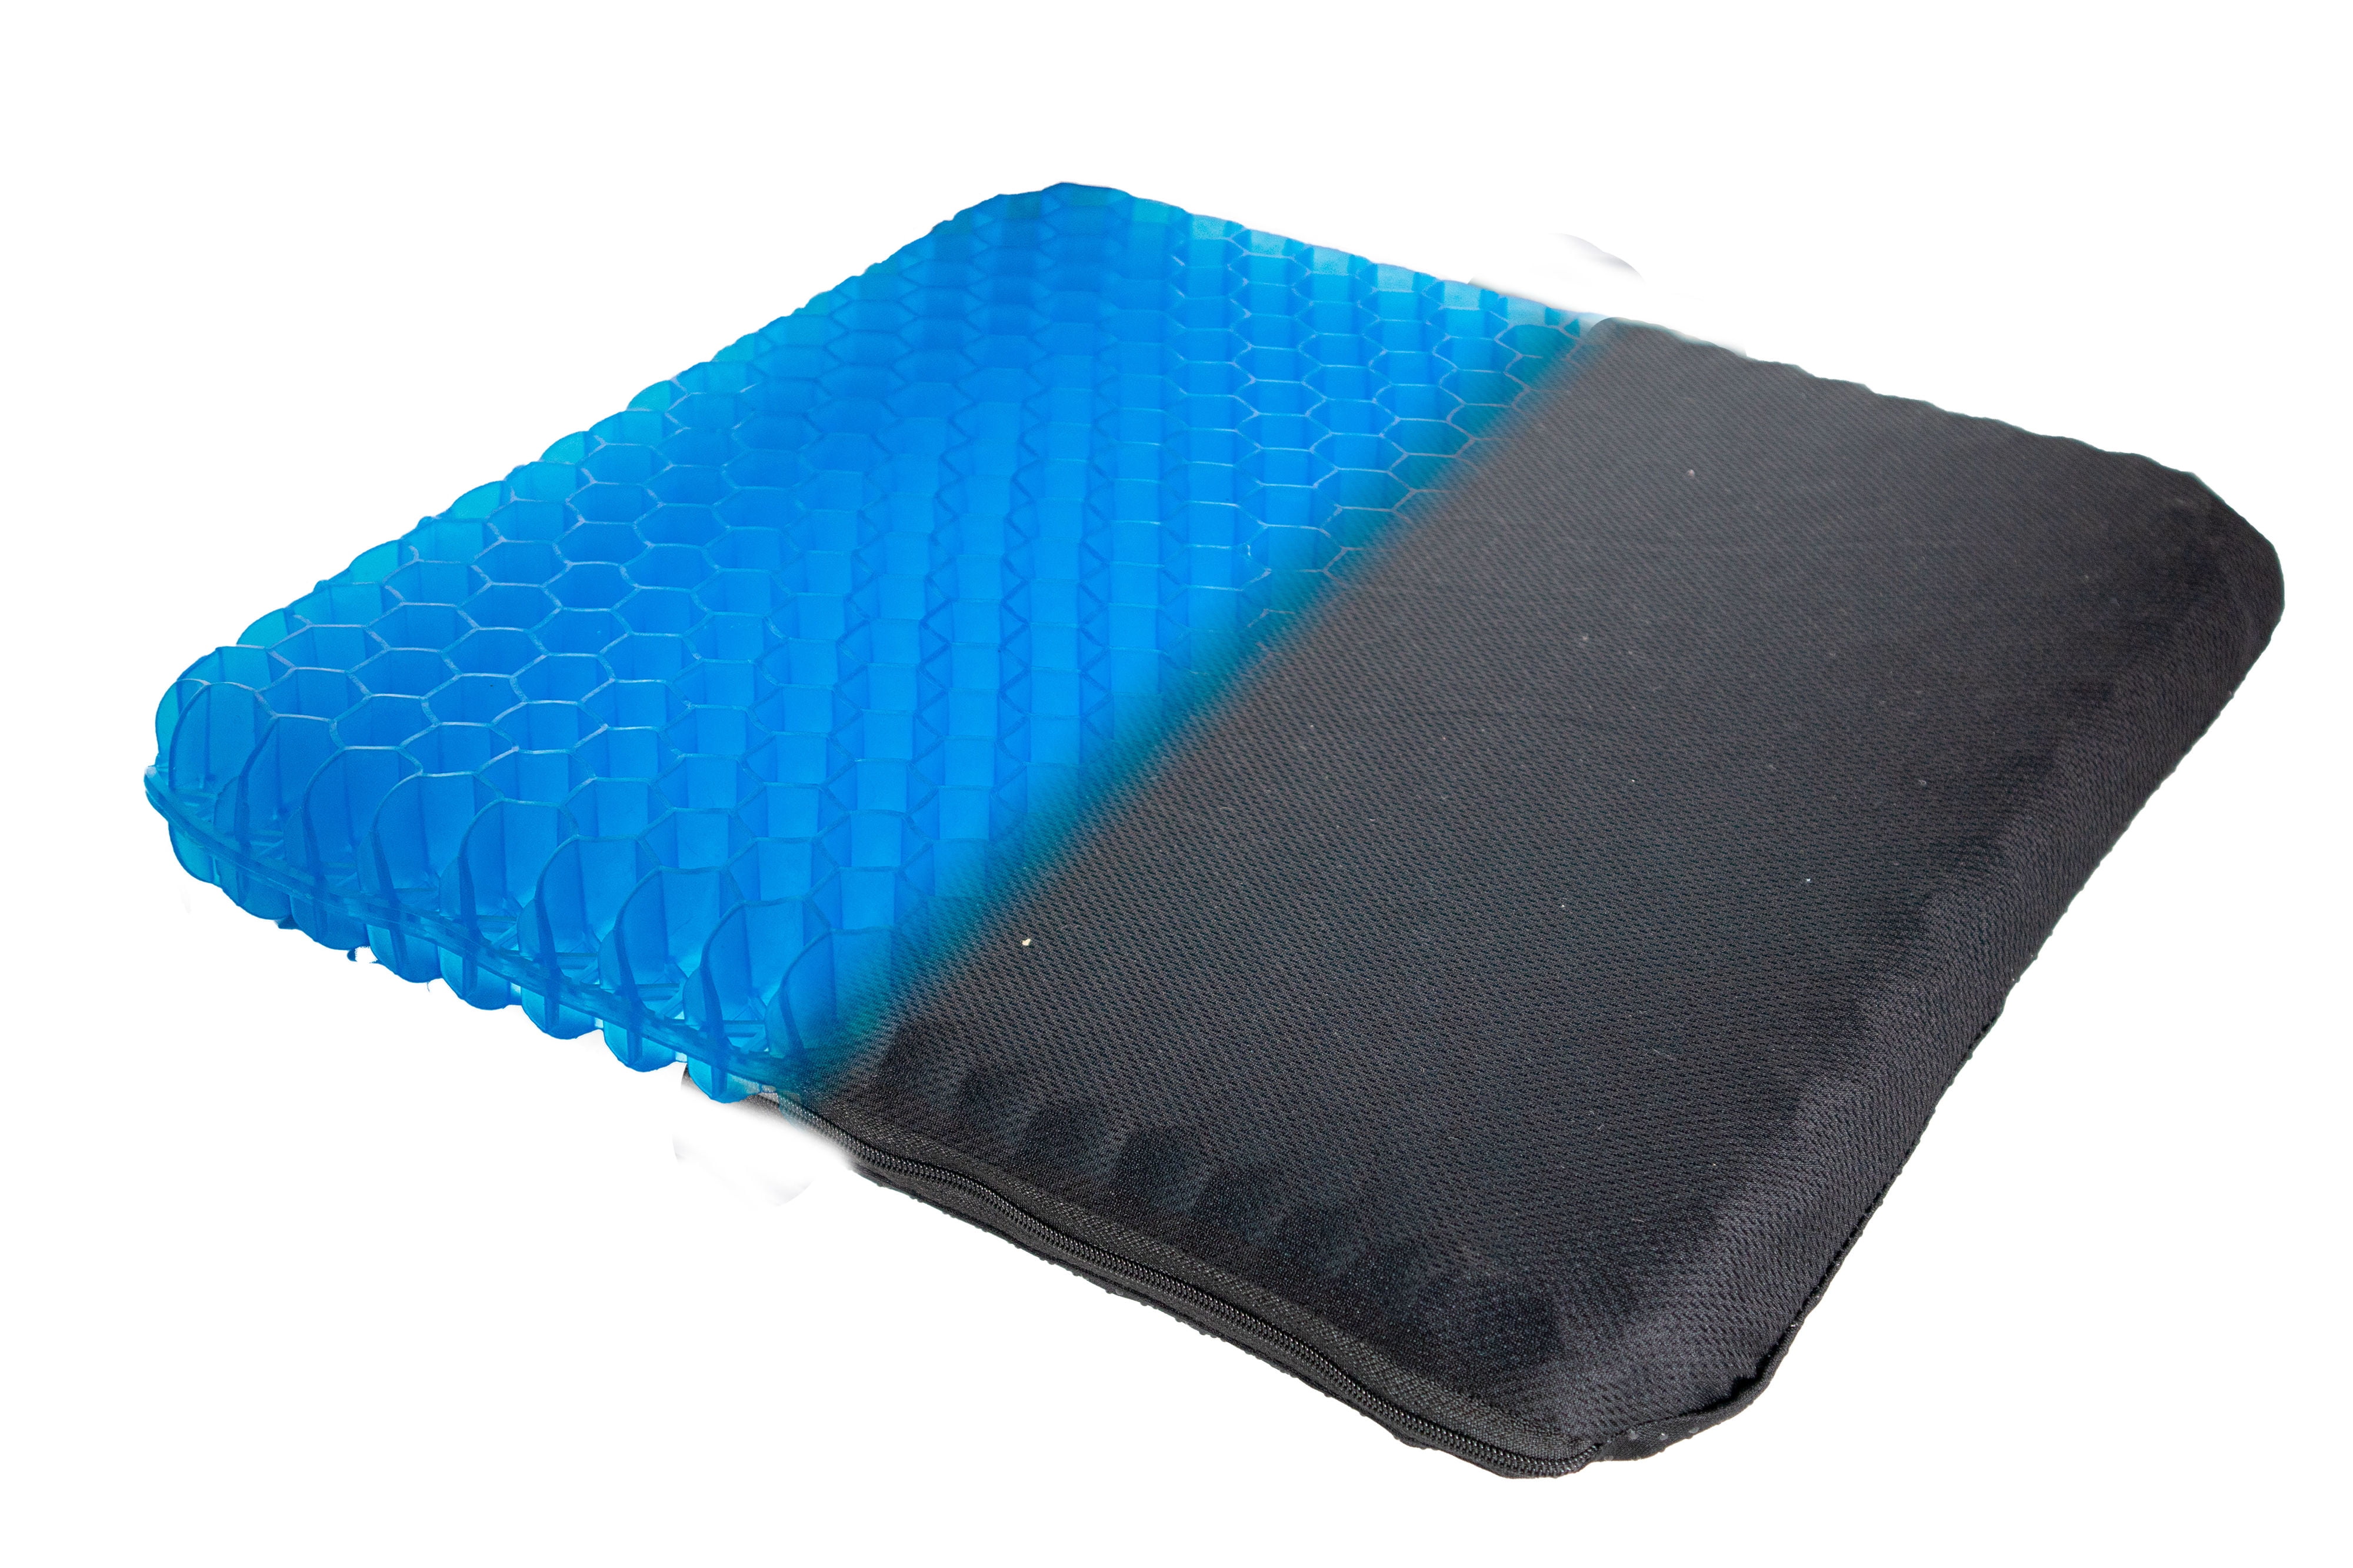 Bicmte Honeycomb Gel Support Seat Cushion with Non-Slip Breathable Cov